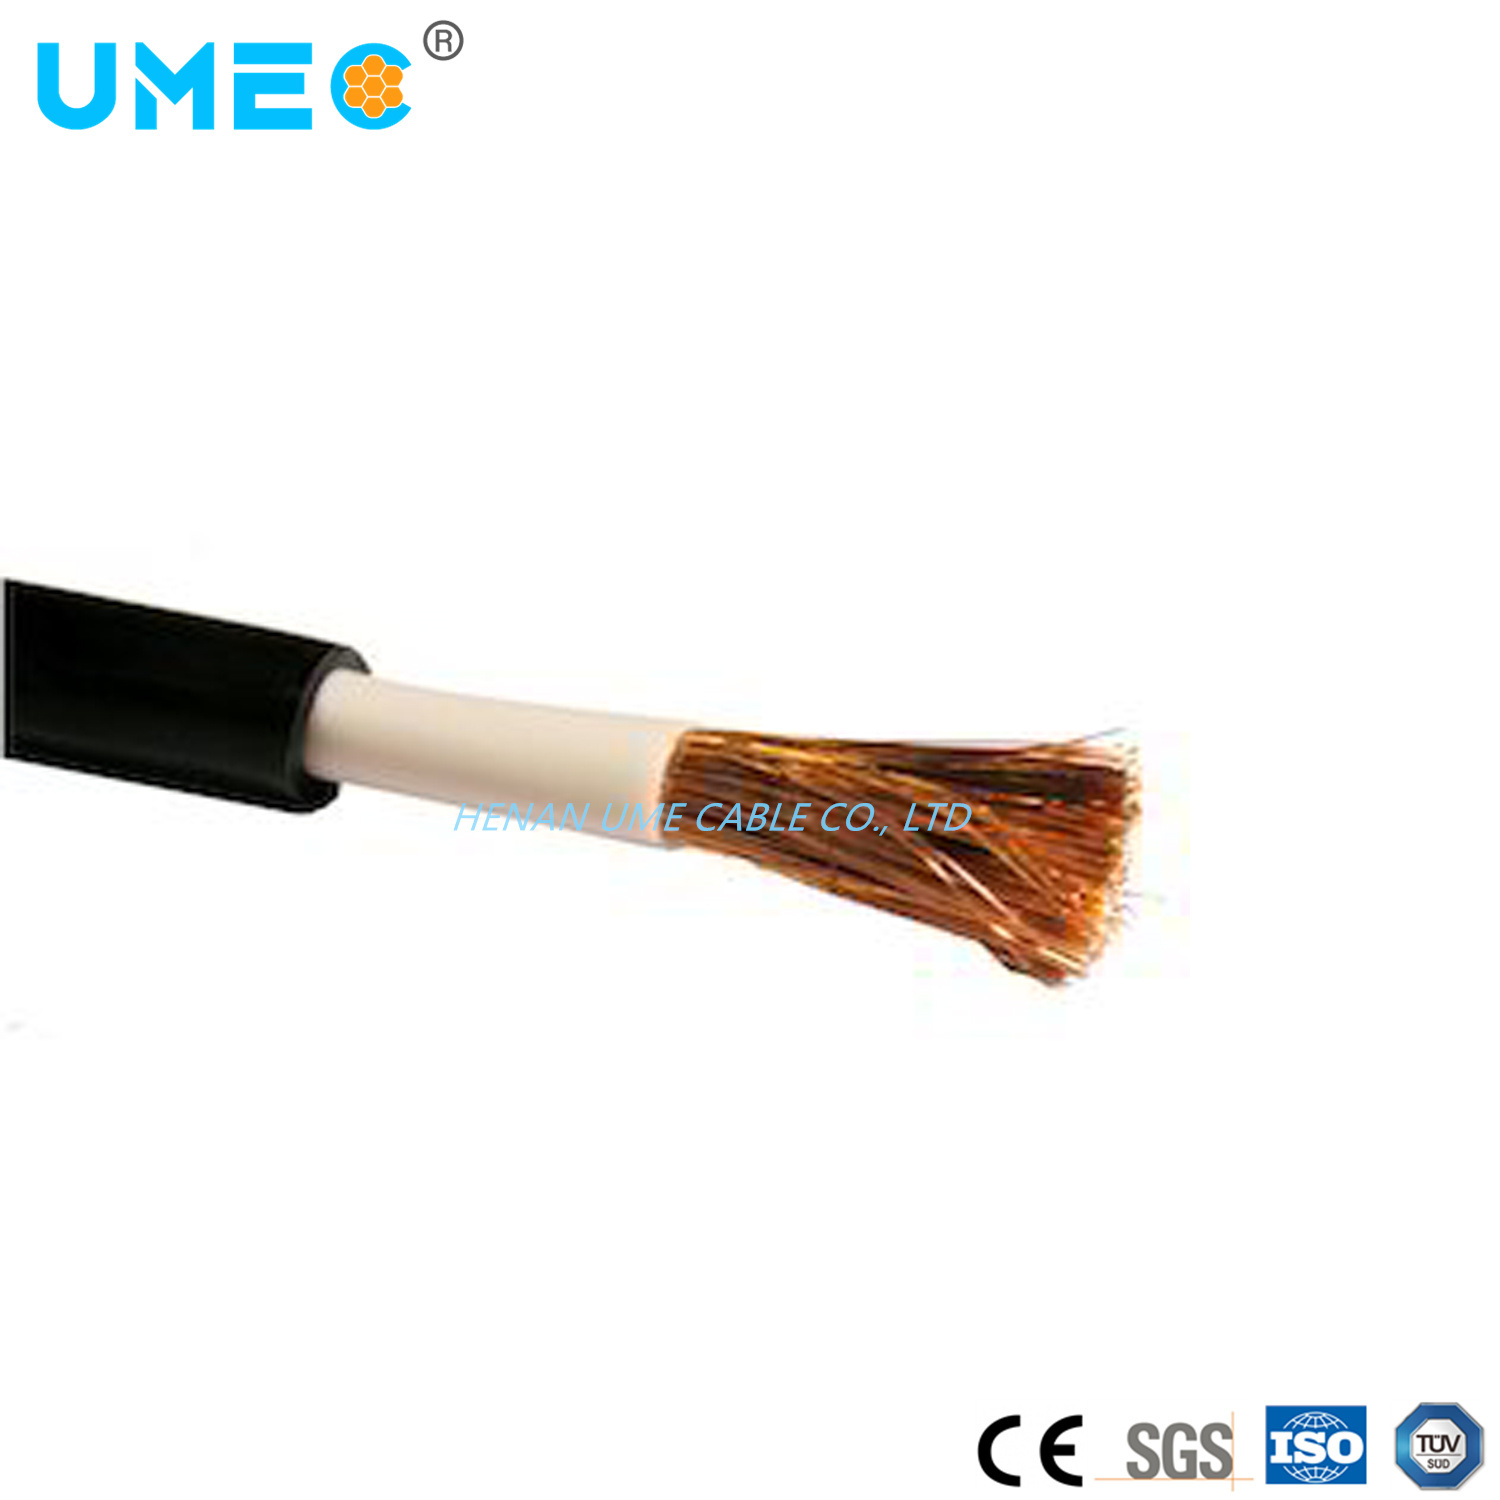 Electrical Safety Equipment 0.6/1kv Silicone Rubber Cable Black or Transparent Jg14/0.4mmx19 40/0.1mmx7X7